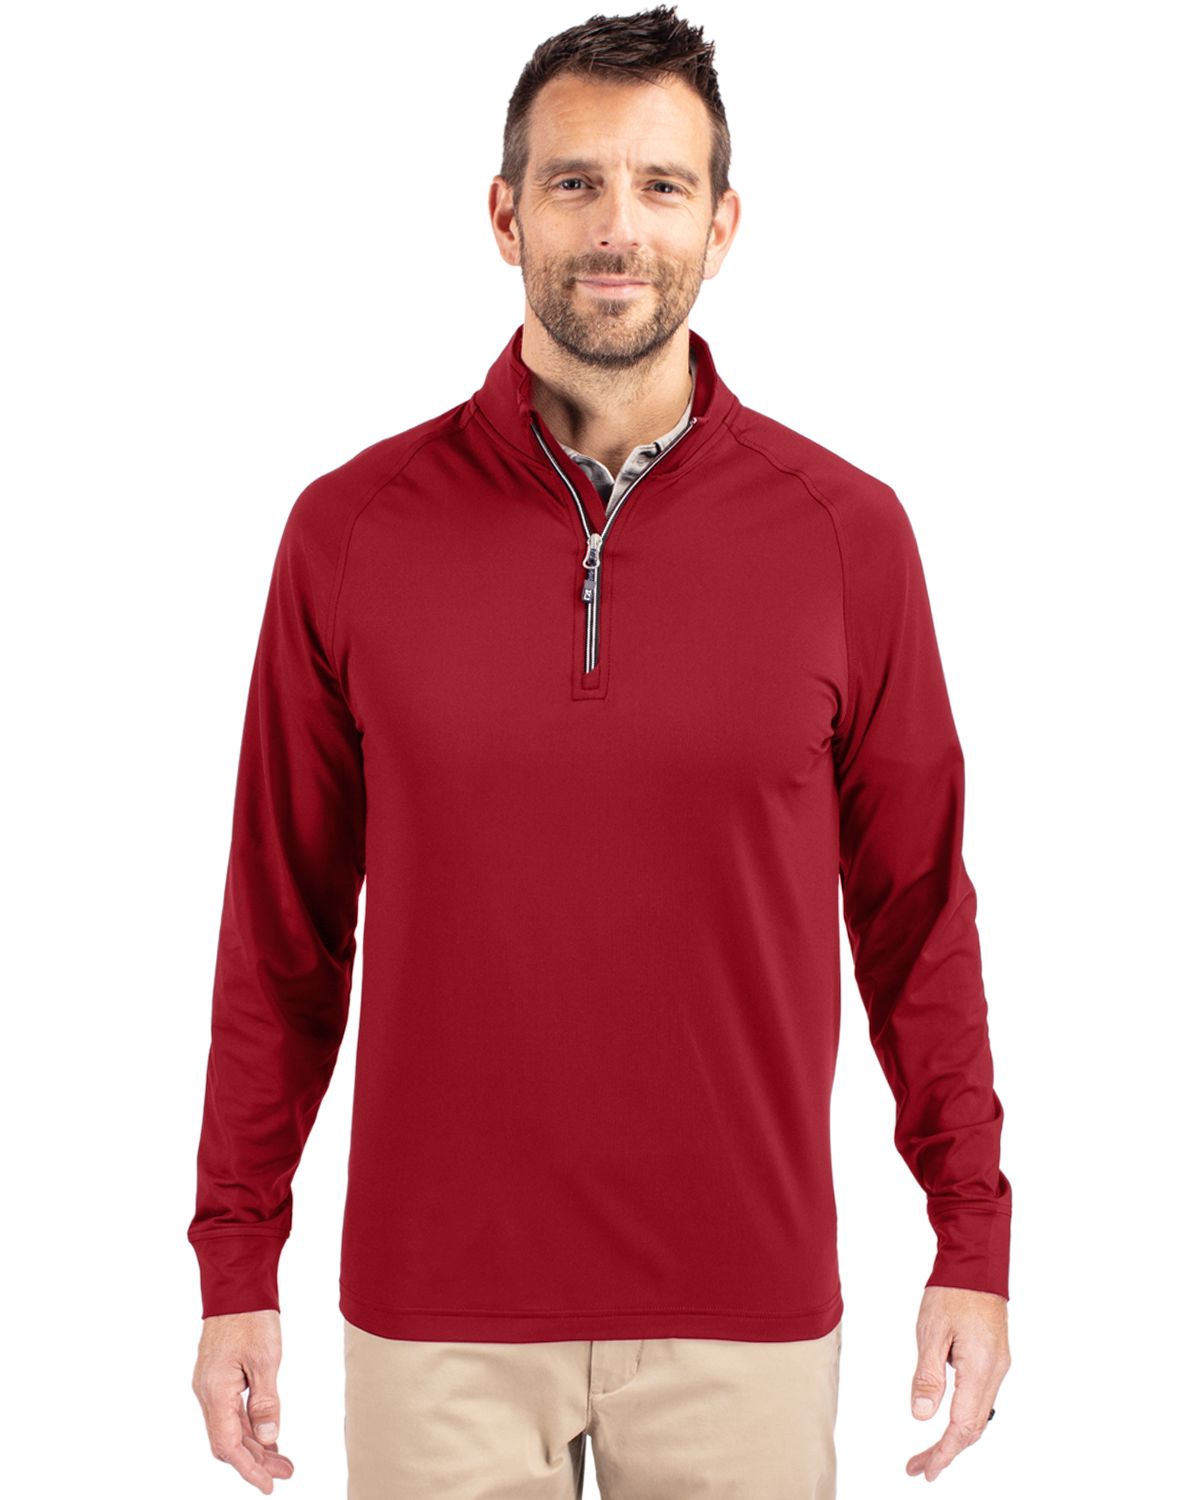 Men's Adapt Eco Knit Stretch Recycled Quarter Zip Pullover Jacket - Cardinal red